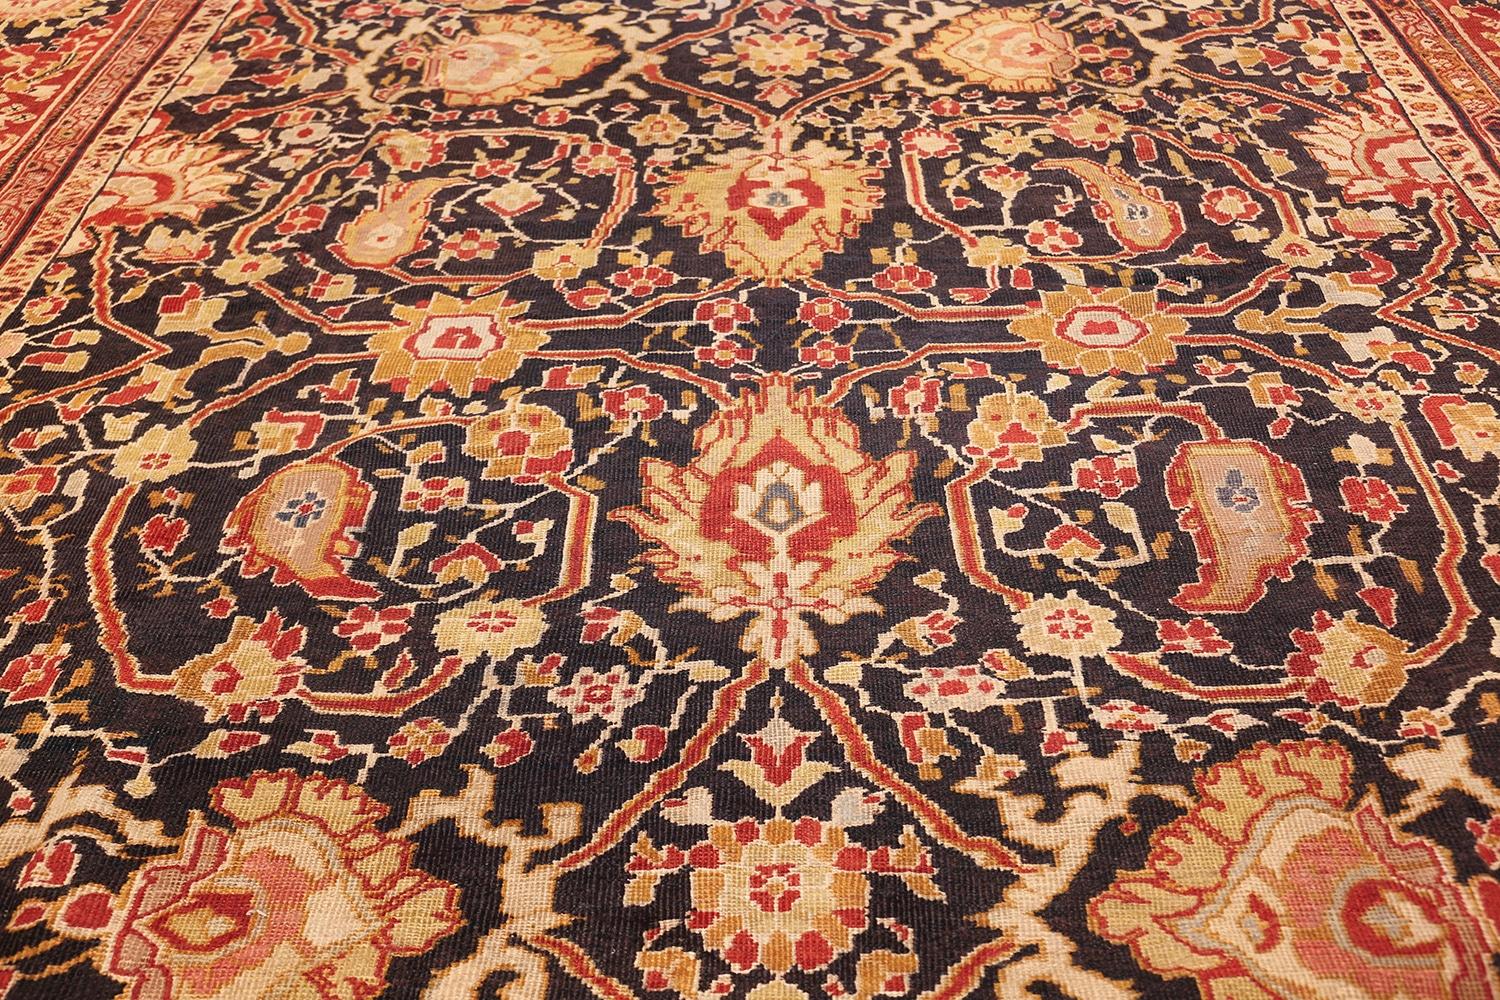 Magnificent and impressive black and red antique Persian ziegler Sultanabad rug, origin: Persia, circa late 19th century - Ziegler Sultanabad Rugs have a special place in carpet history and make an elegant addition to a traditional or contemporary